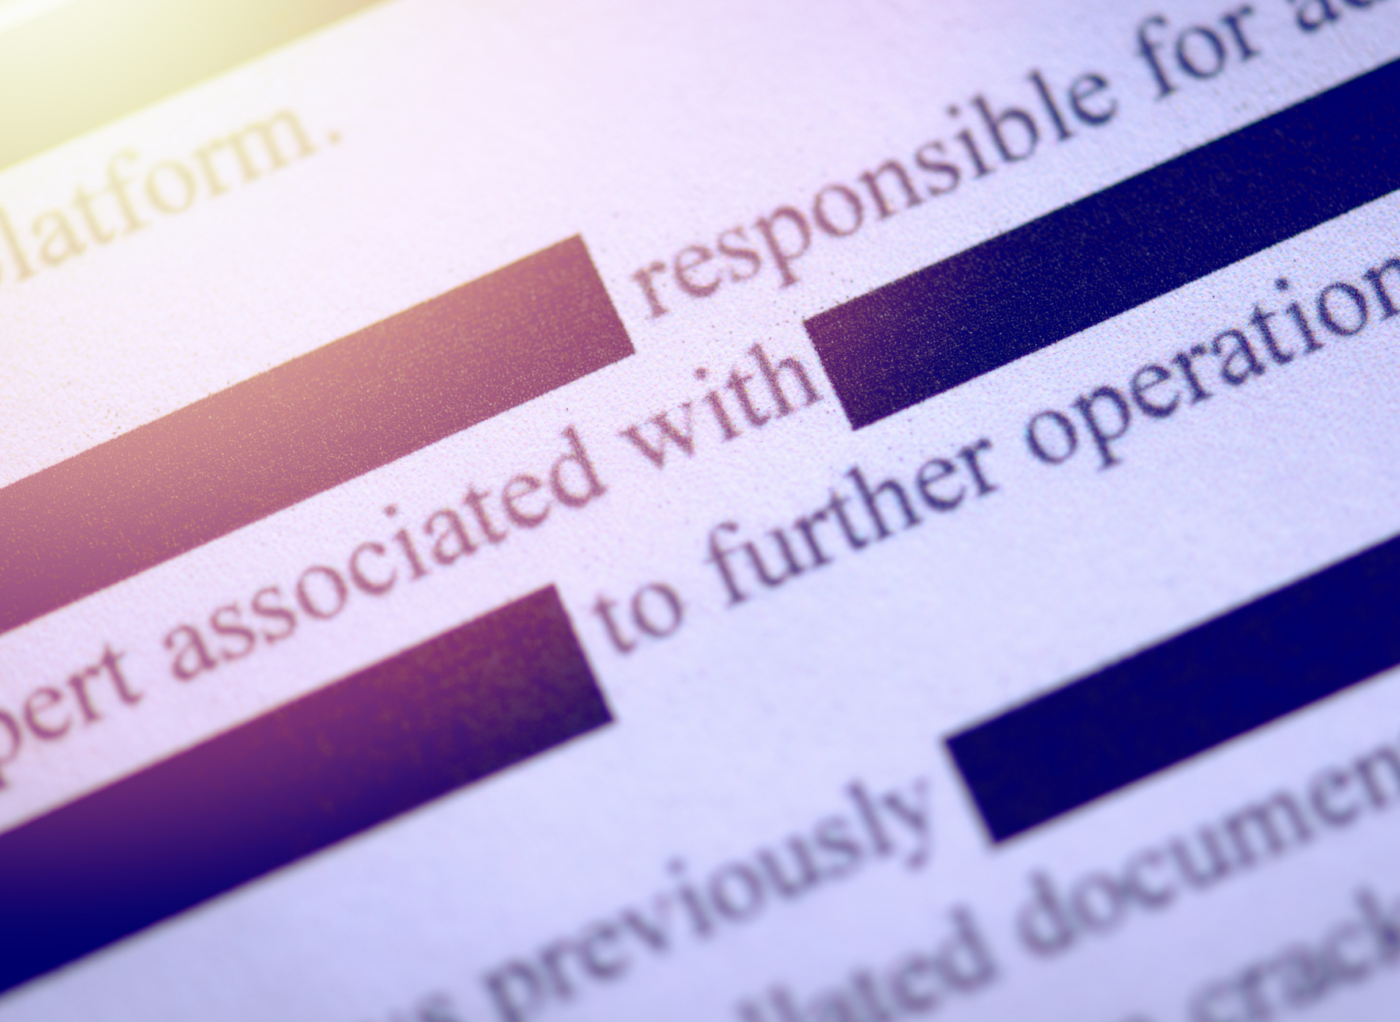 close-up photo of a redacted document